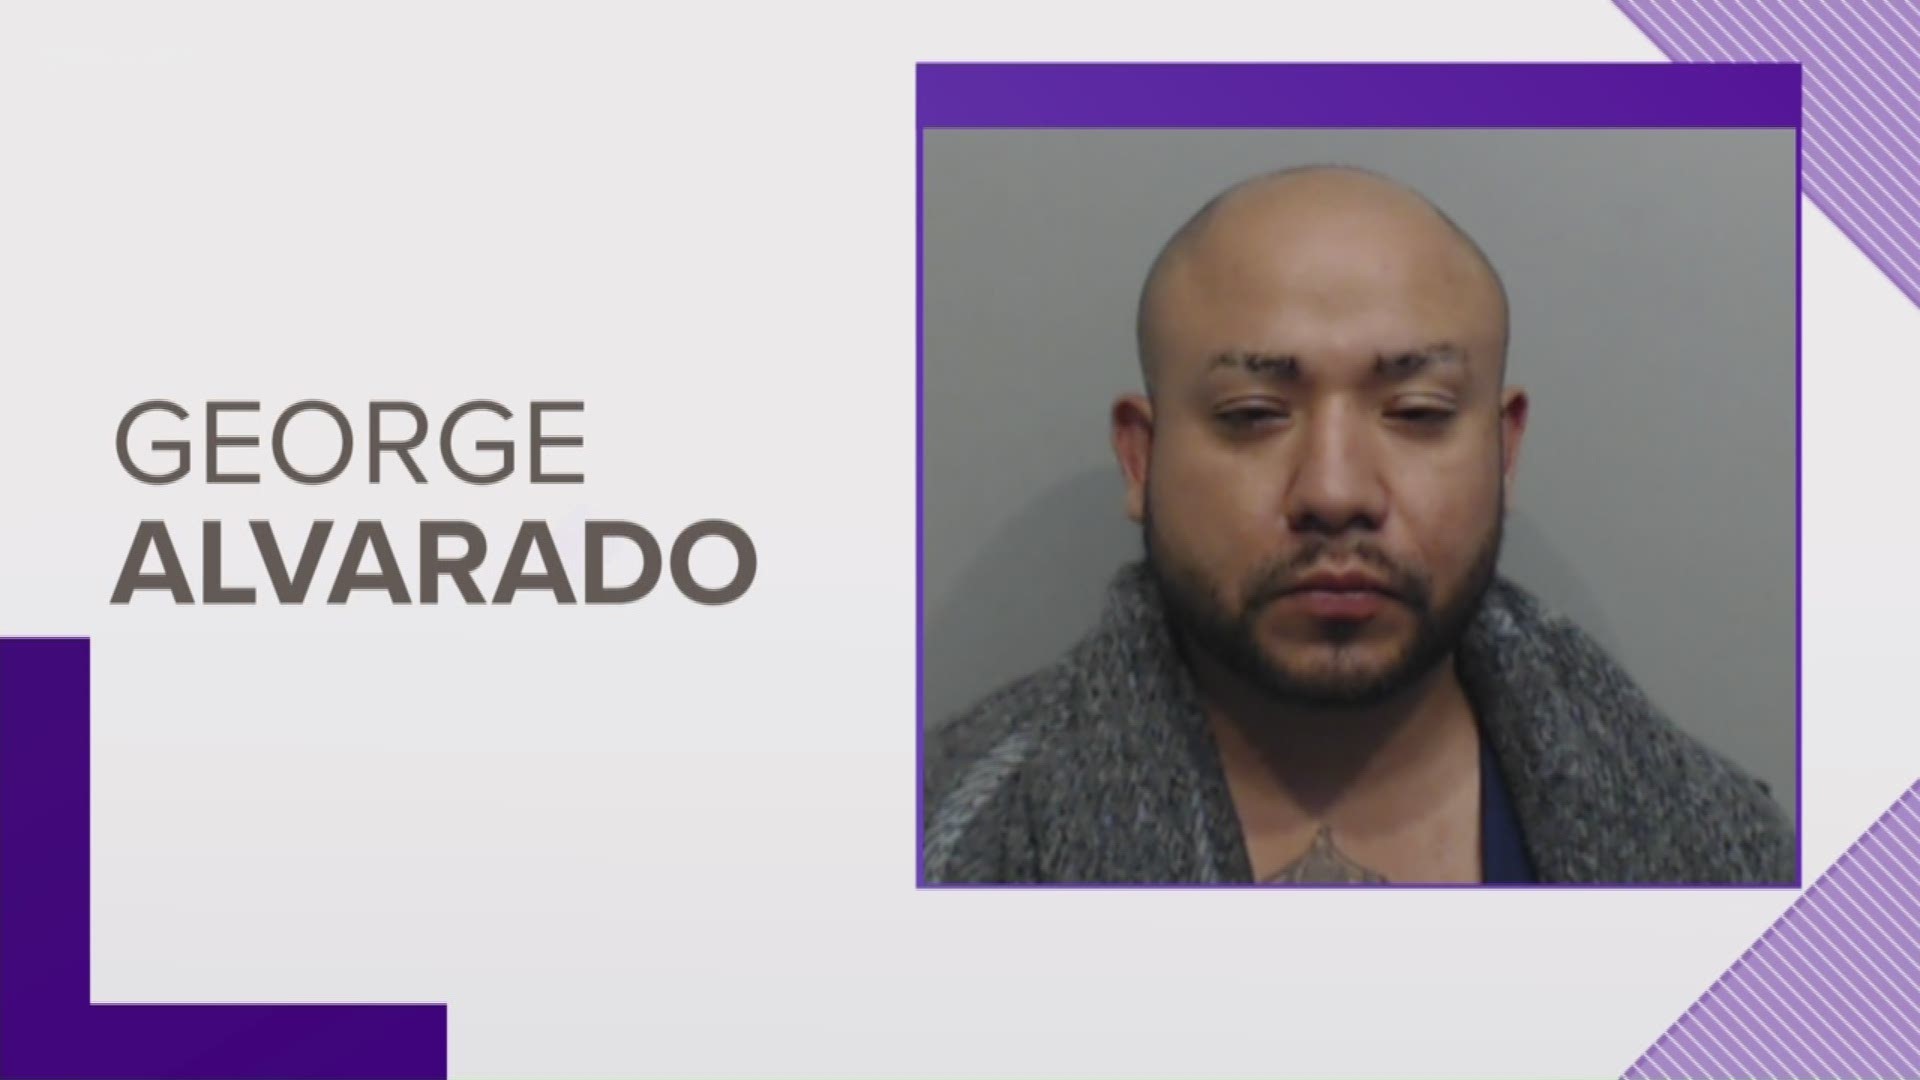 San Marcos police said the man tried to run a red light after leaving the outlets and caused a crash.